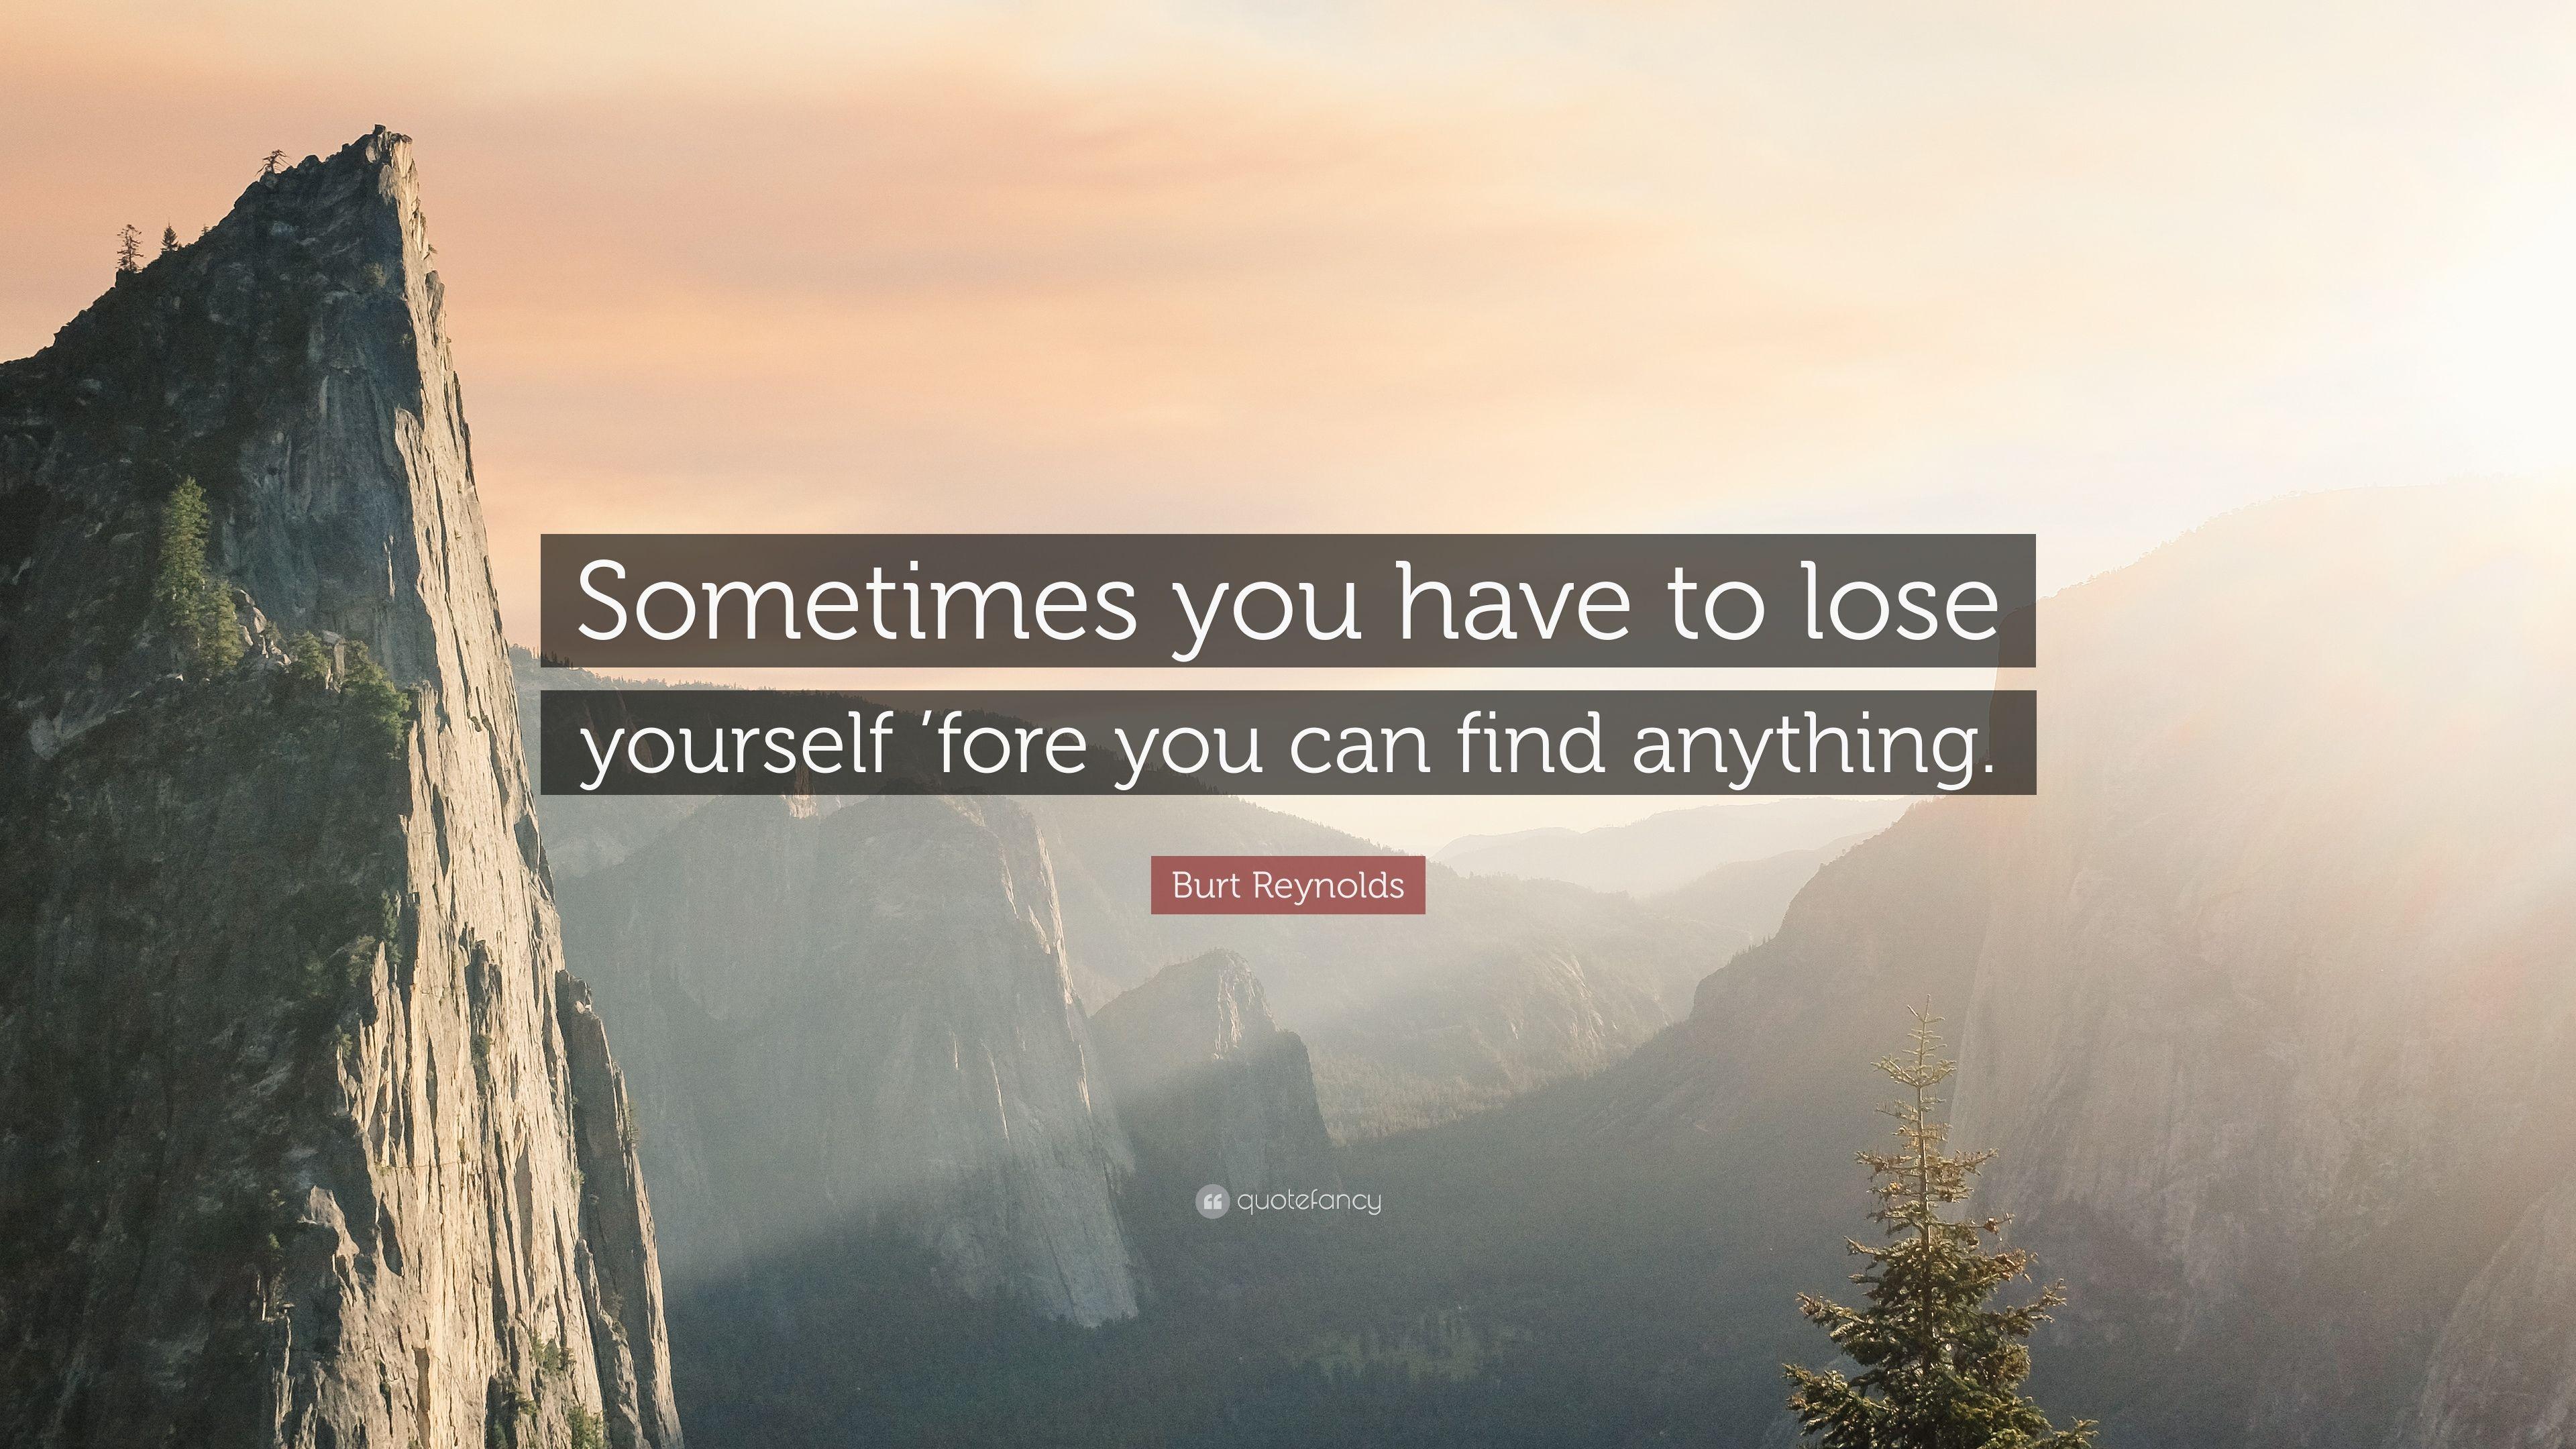 Burt Reynolds Quote: “Sometimes you have to lose yourself 'fore